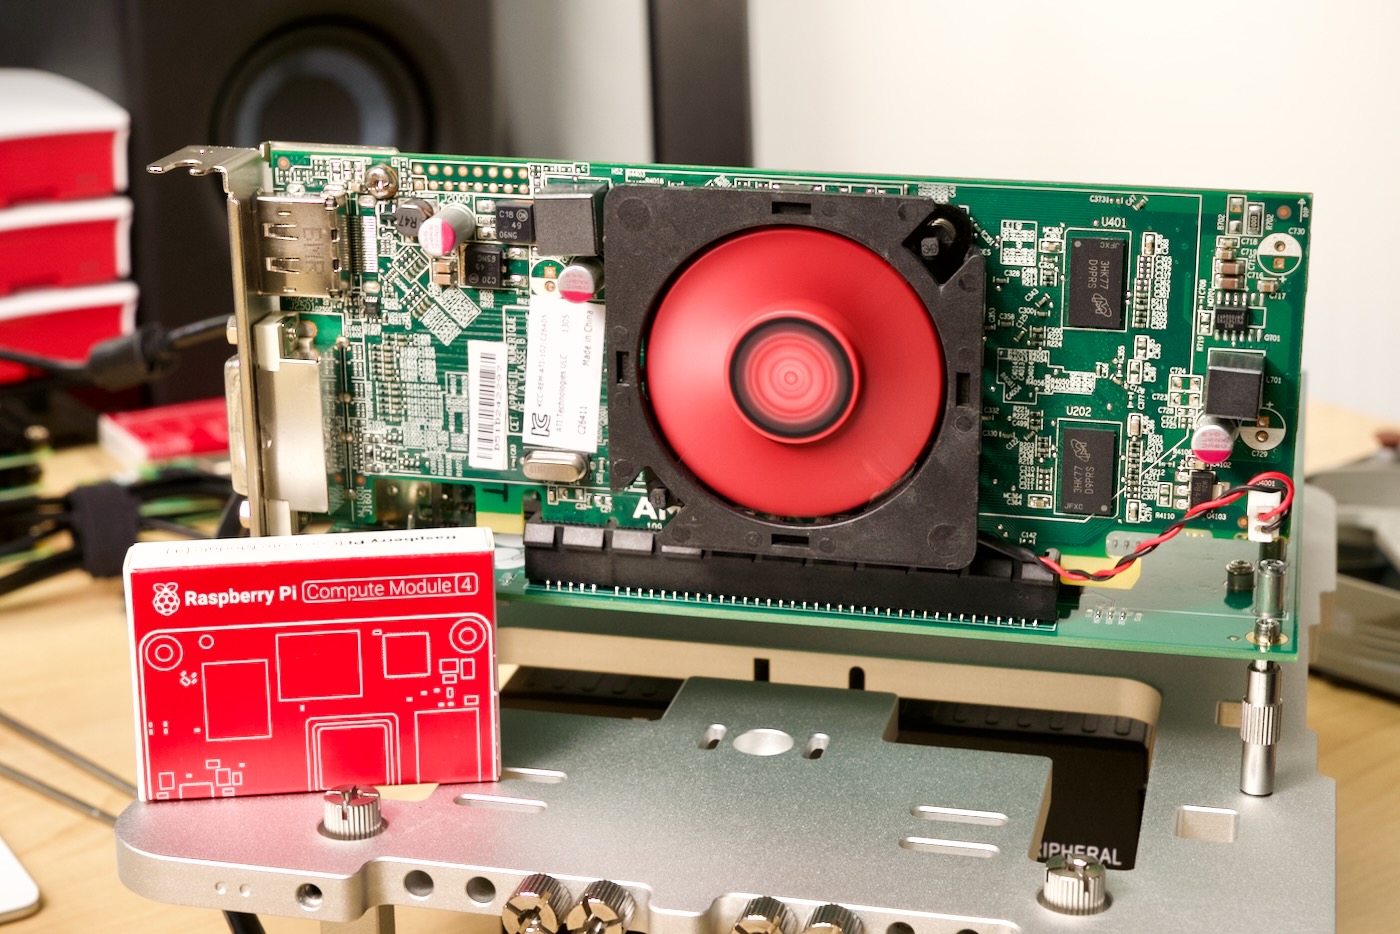 External graphics work on the Pi | Jeff Geerling